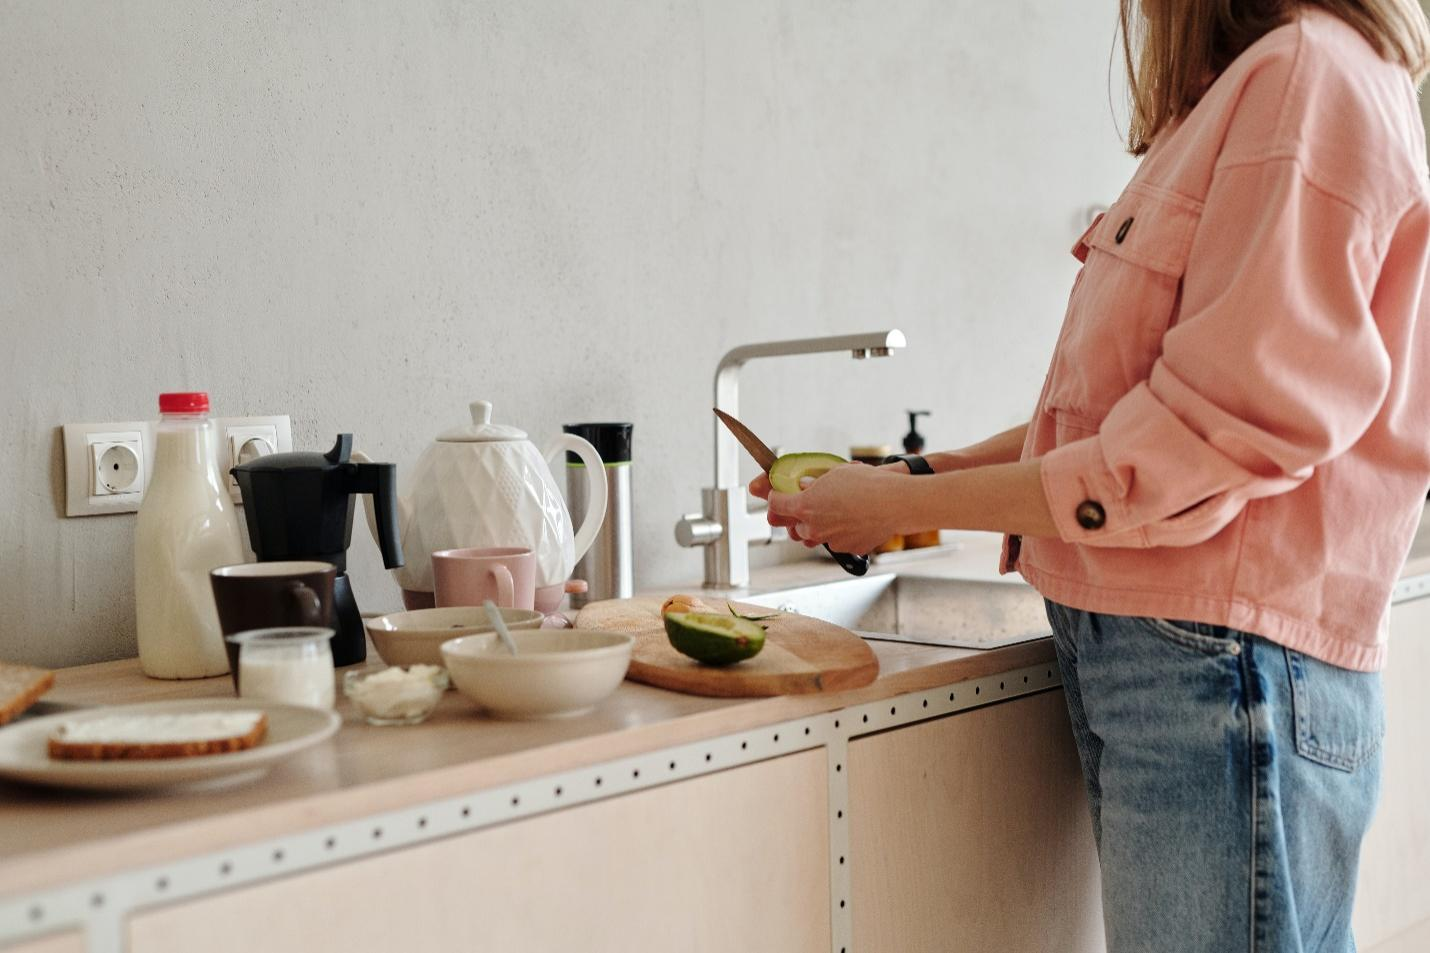 A woman enjoys creating meals on her durable quartz kitchen top